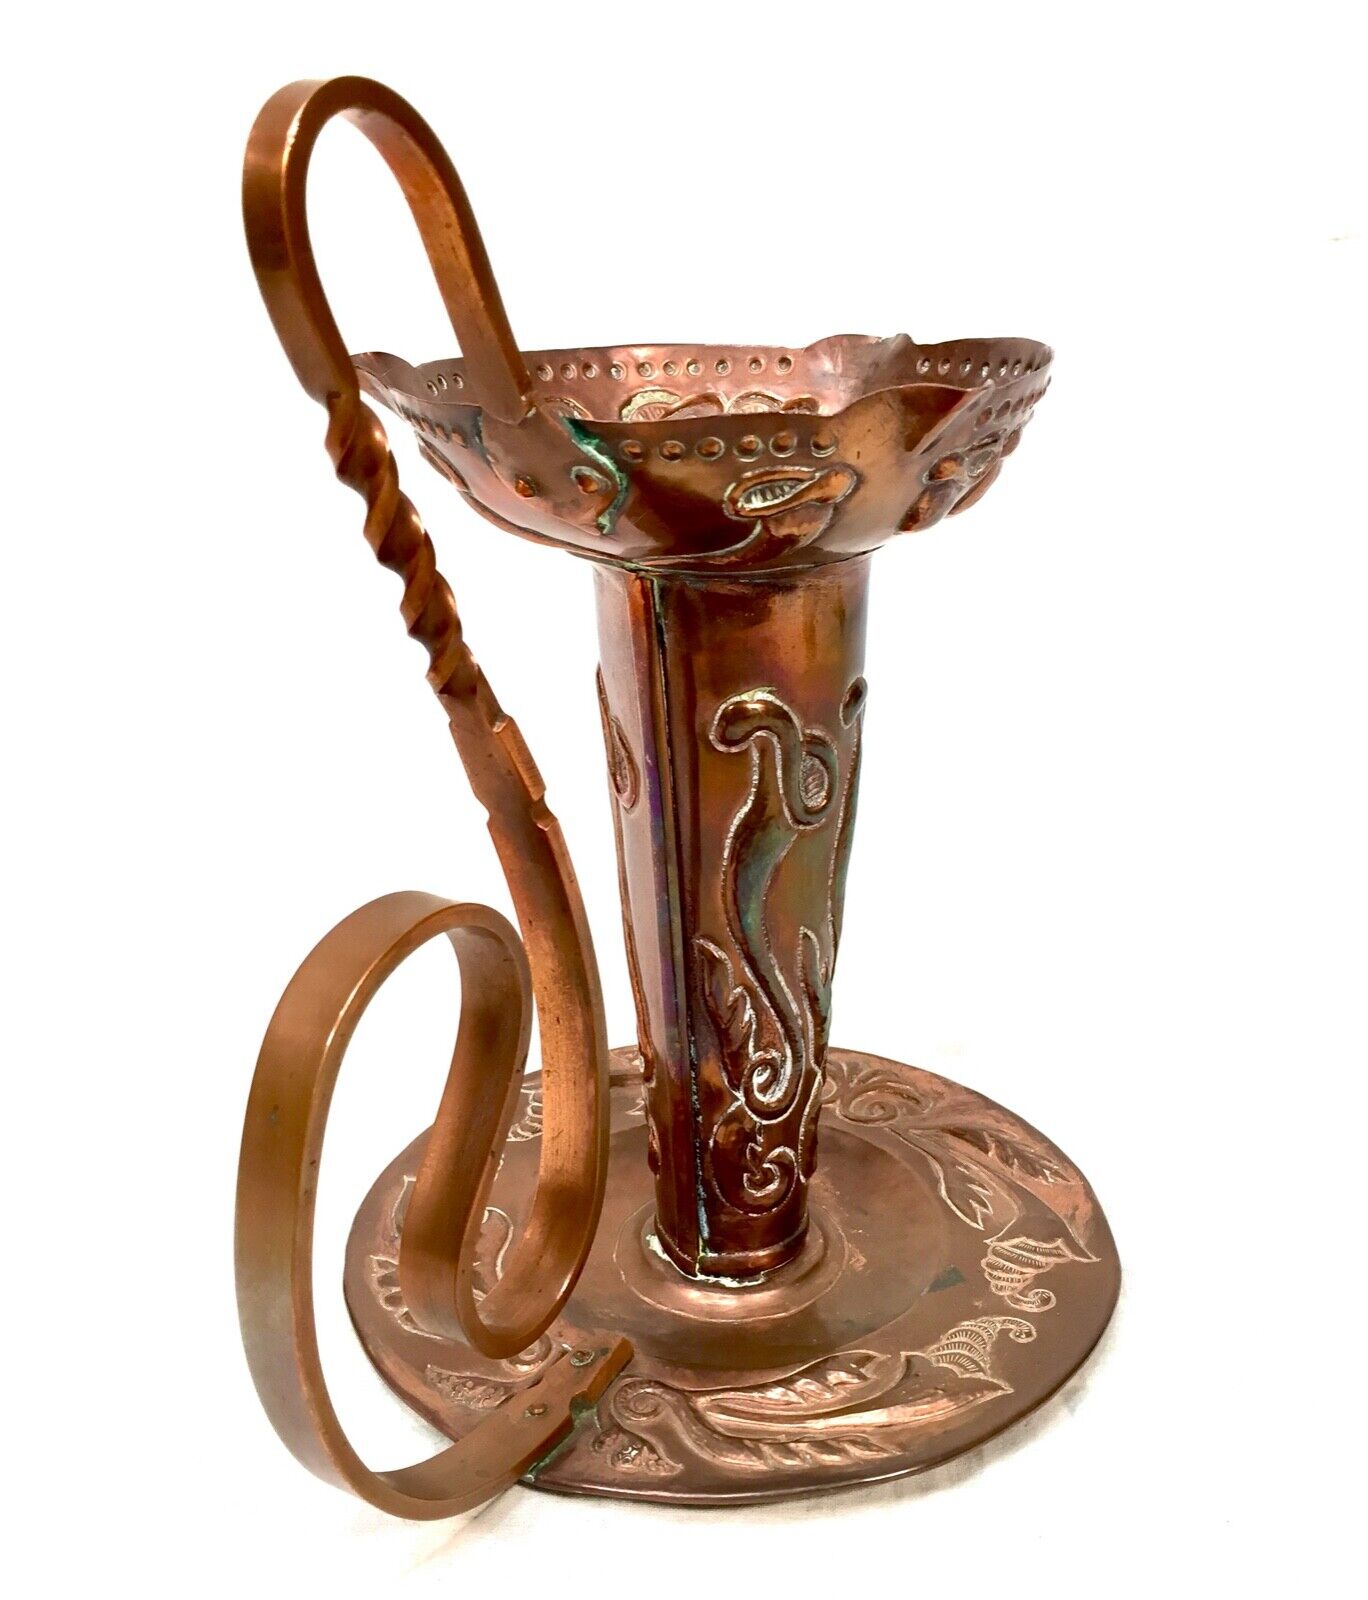 Antique Arts And Crafts Large Copper Chamber-stick / Candle Holder / c.1900